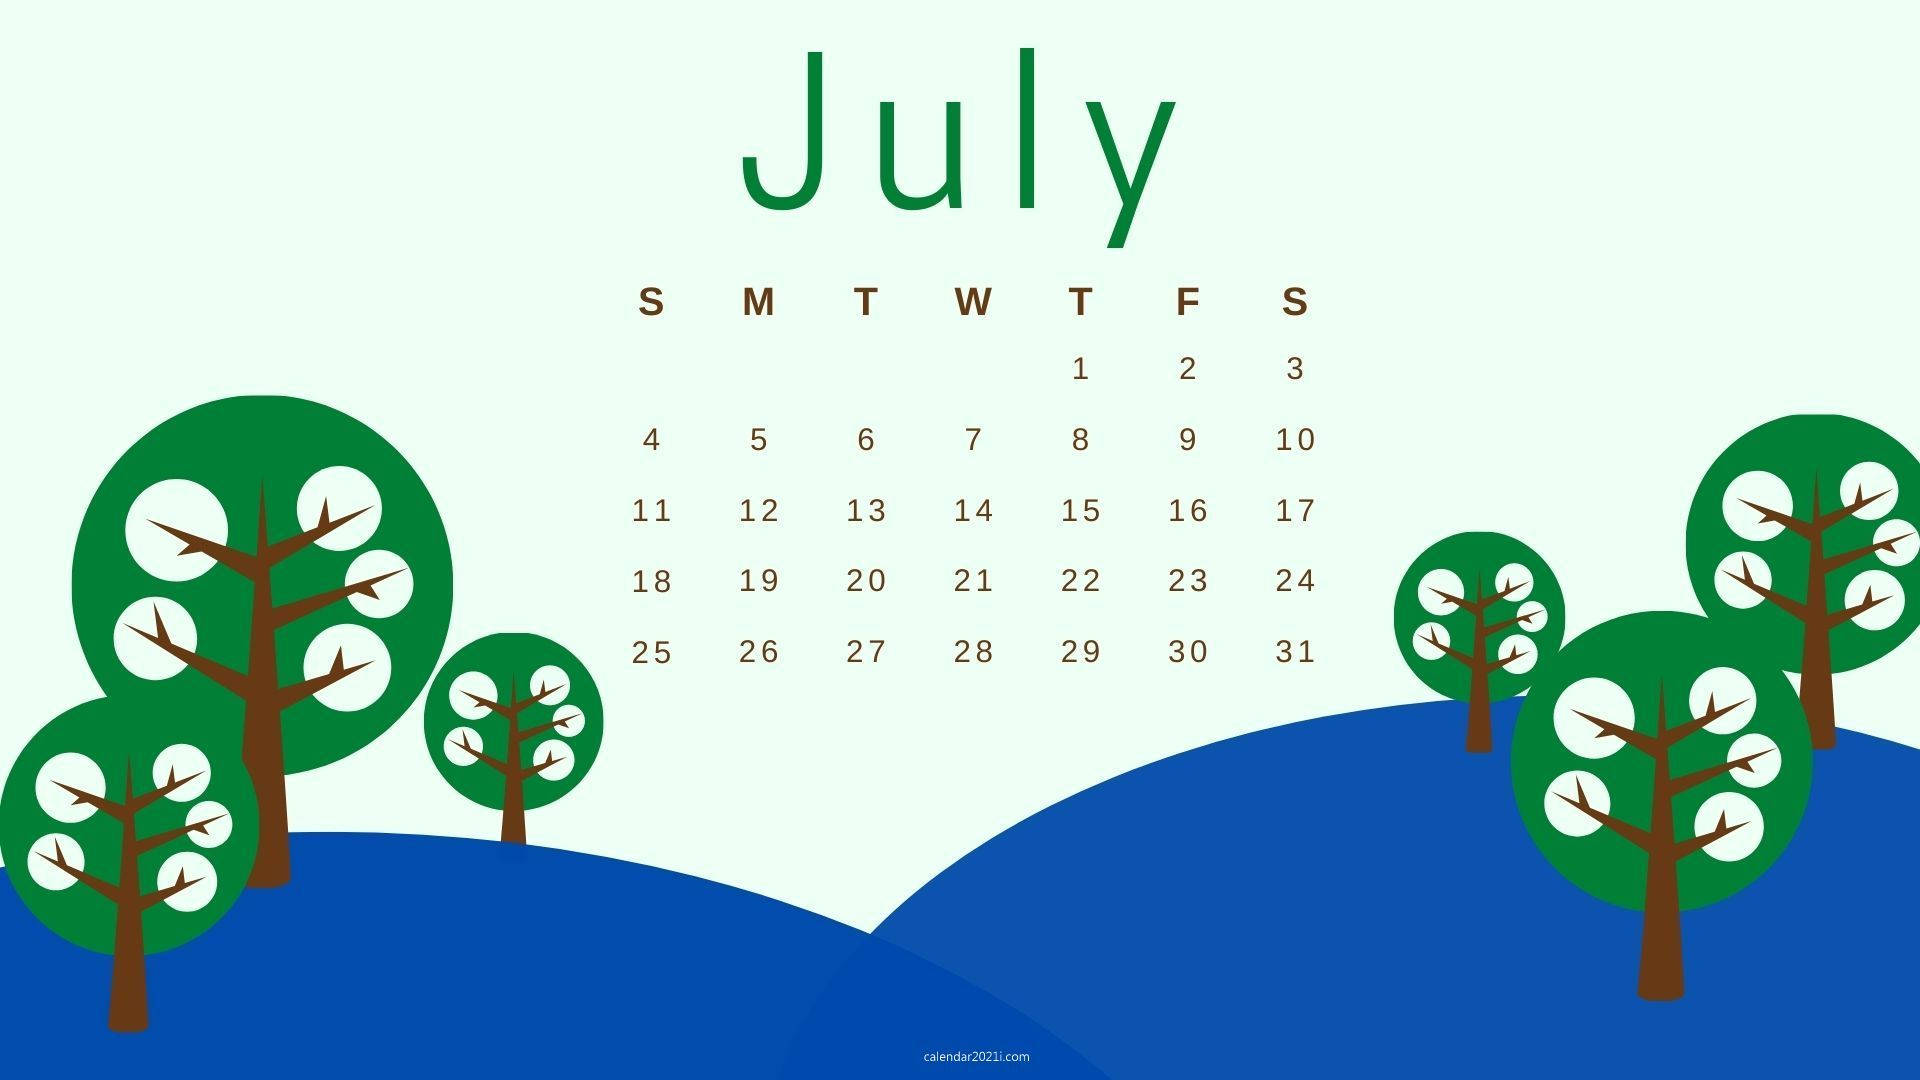 "The Road to a Successful July" Wallpaper